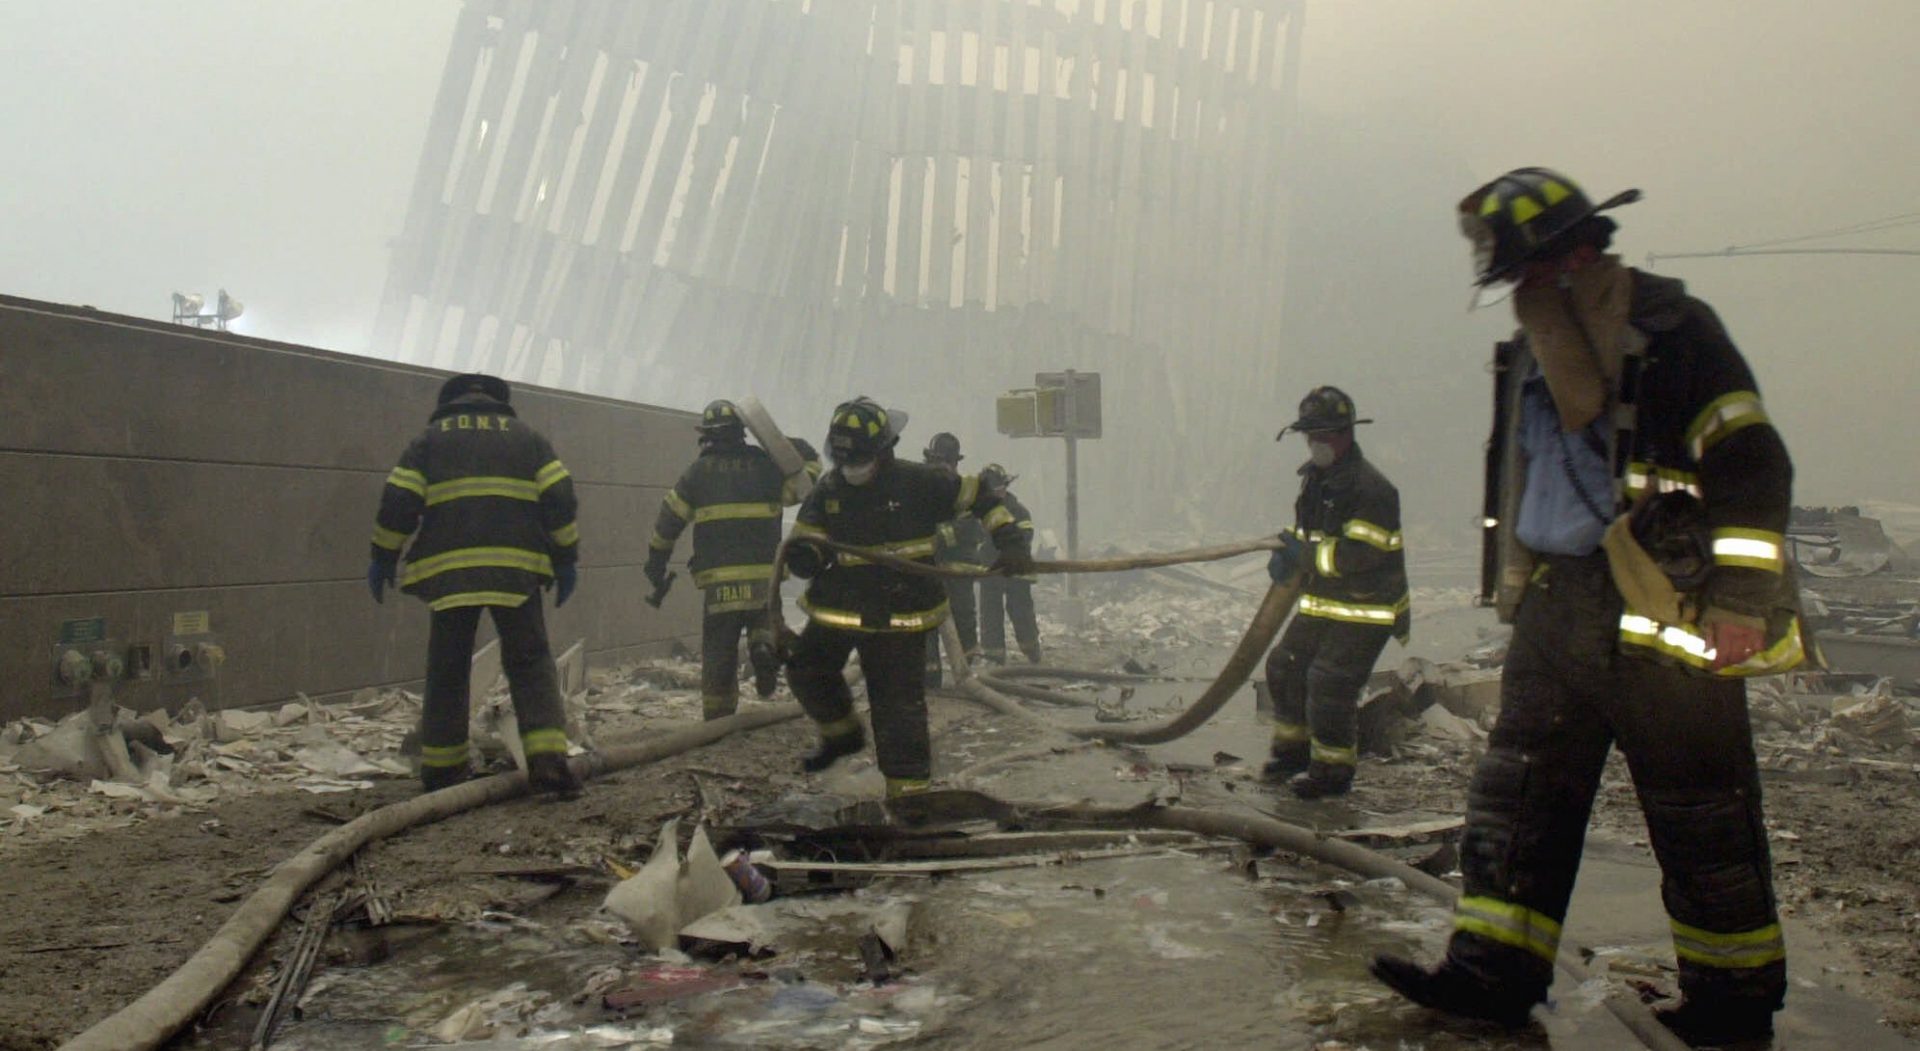 In this Sept. 11, 2001 file photo, with the skeleton of the World Trade Center twin towers in the background, New York City firefighters work amid debris on Cortlandt St. after the terrorist attacks.